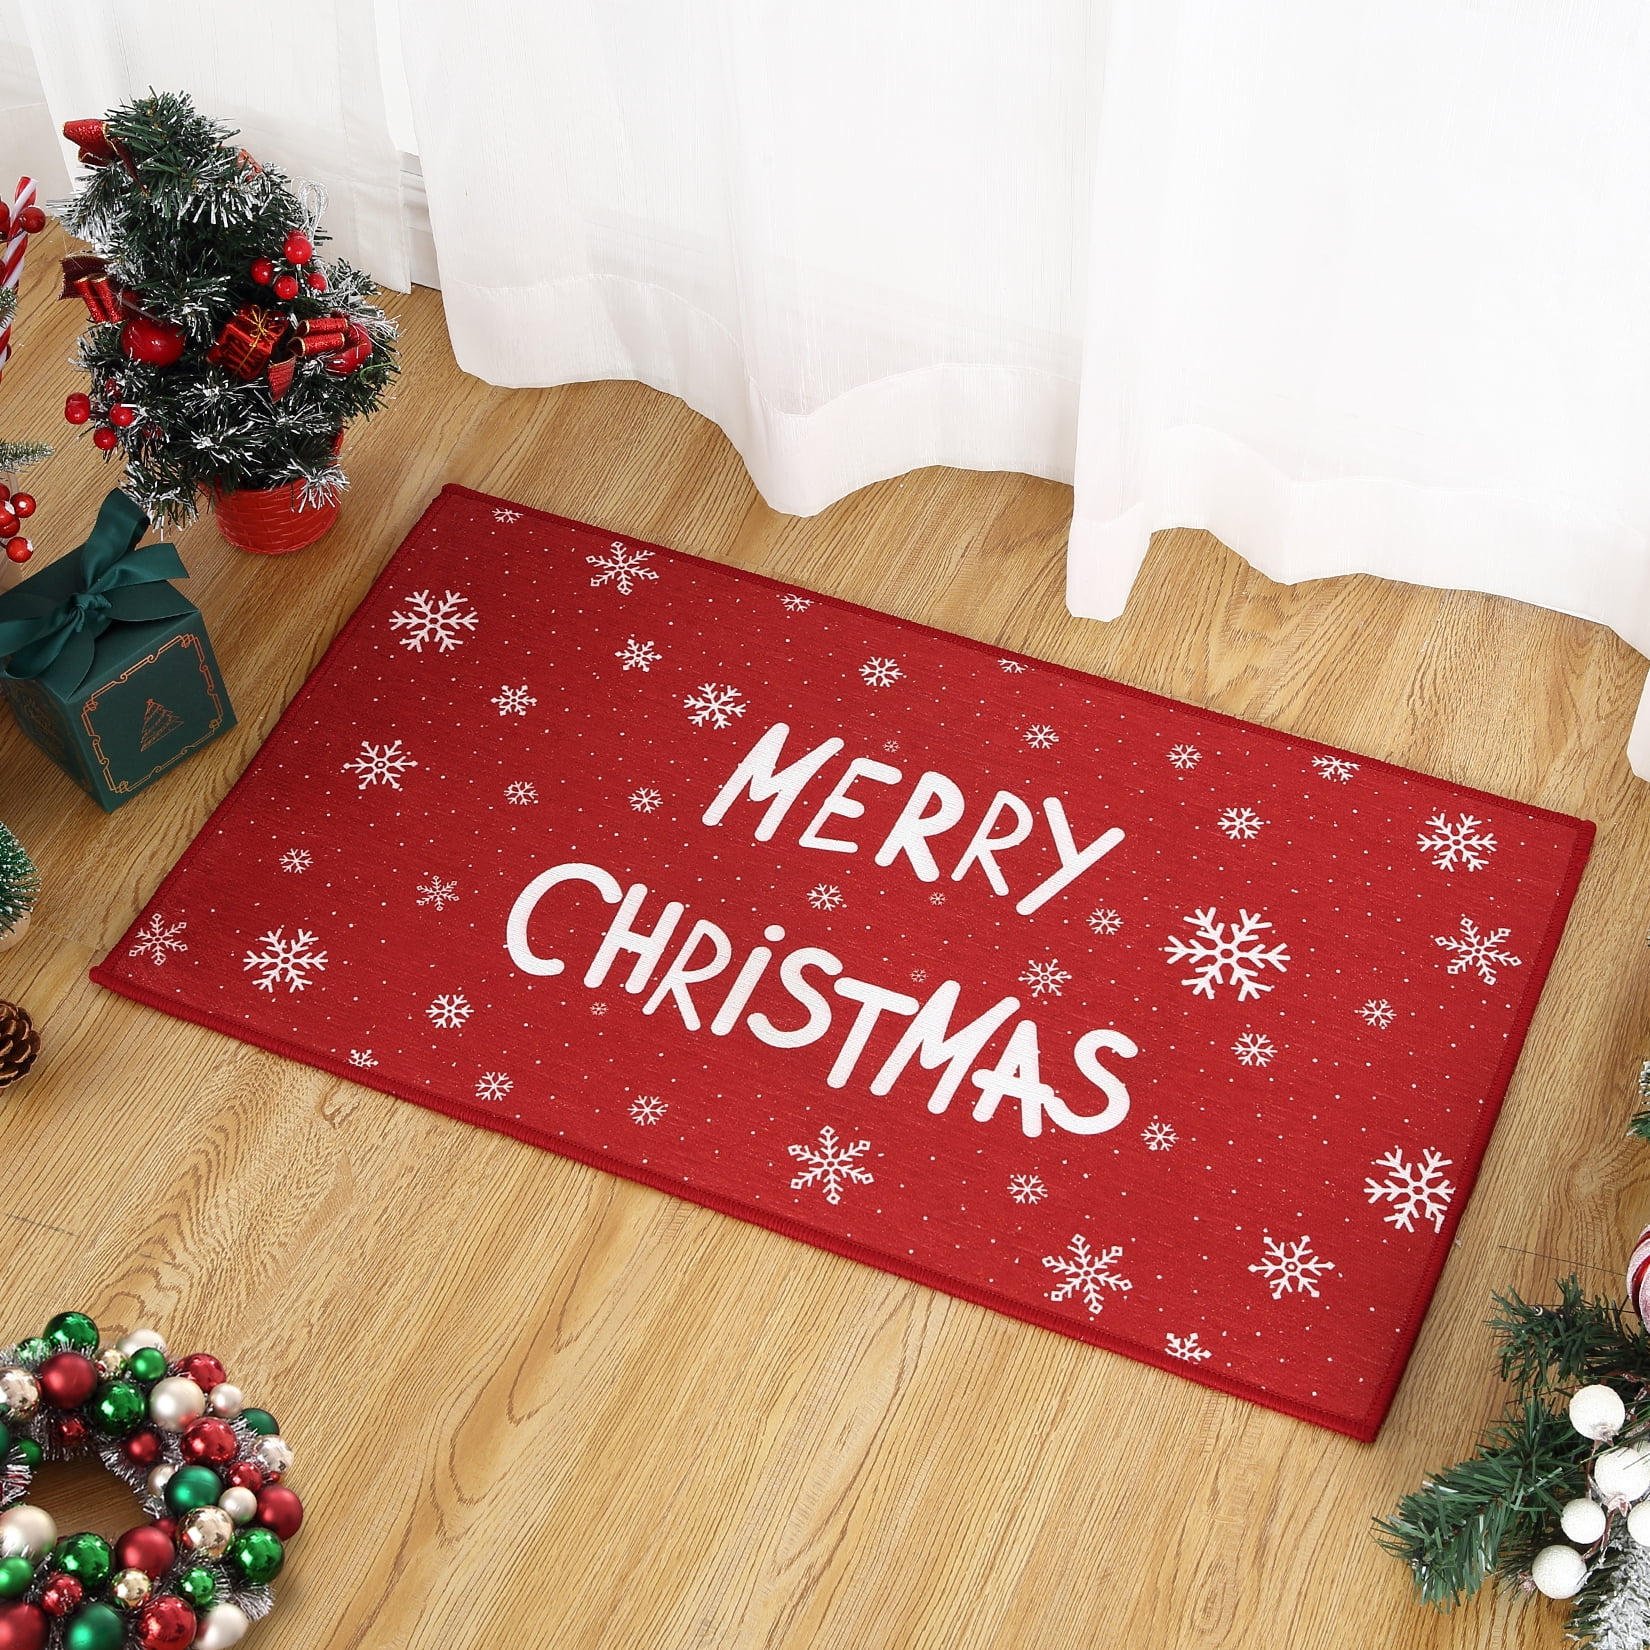 Extra Large Welcome Holiday Mat with Rubber Bottom, Villa Farmhouse Heavy  Duty Entrance Mat for Doorways, 60/80/90/120cm Wide ( Color : Red , Size 